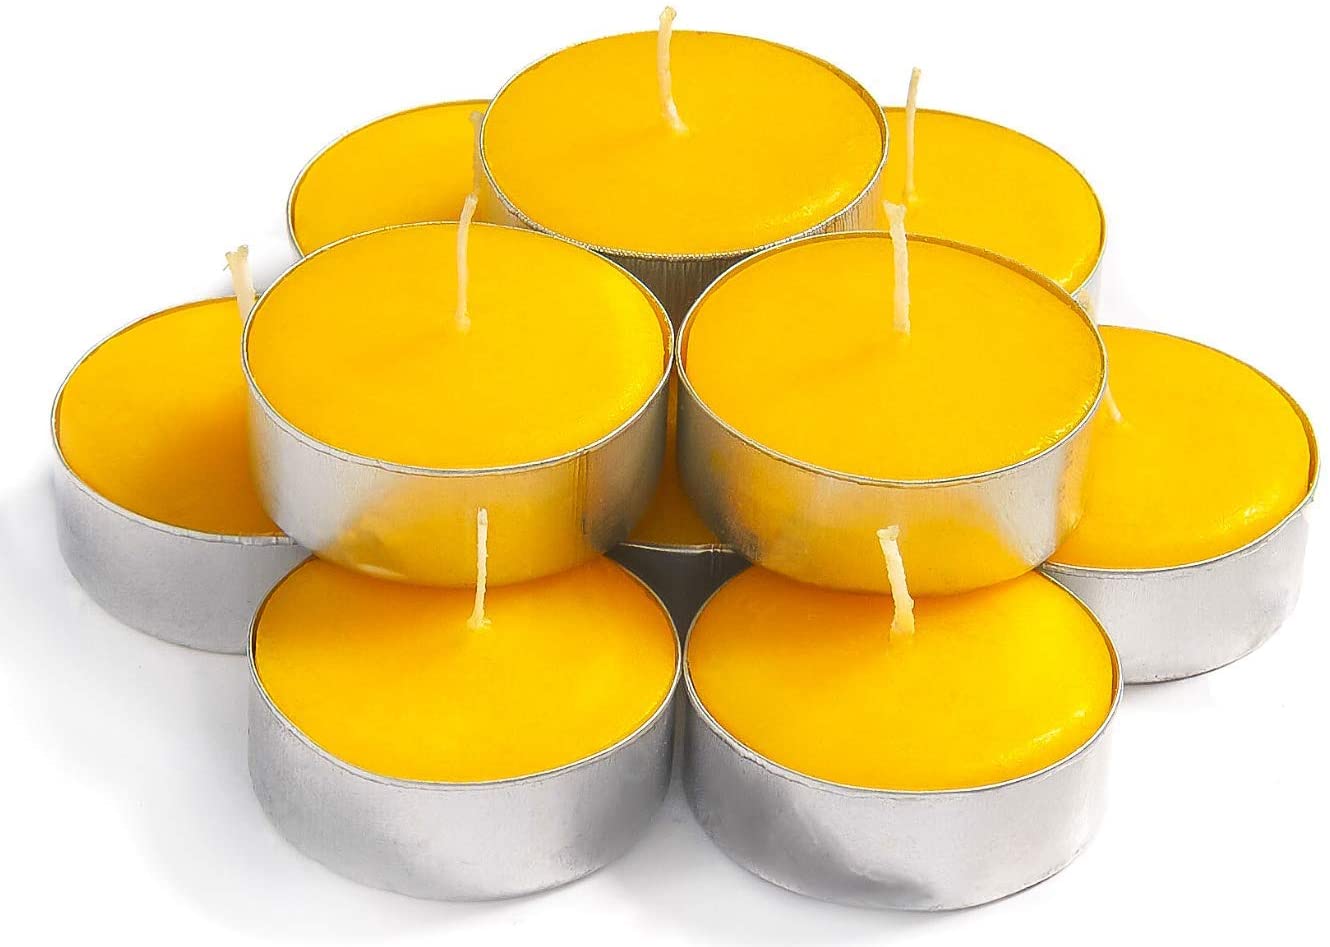 Yellow Tealight Candles - 30 Pack